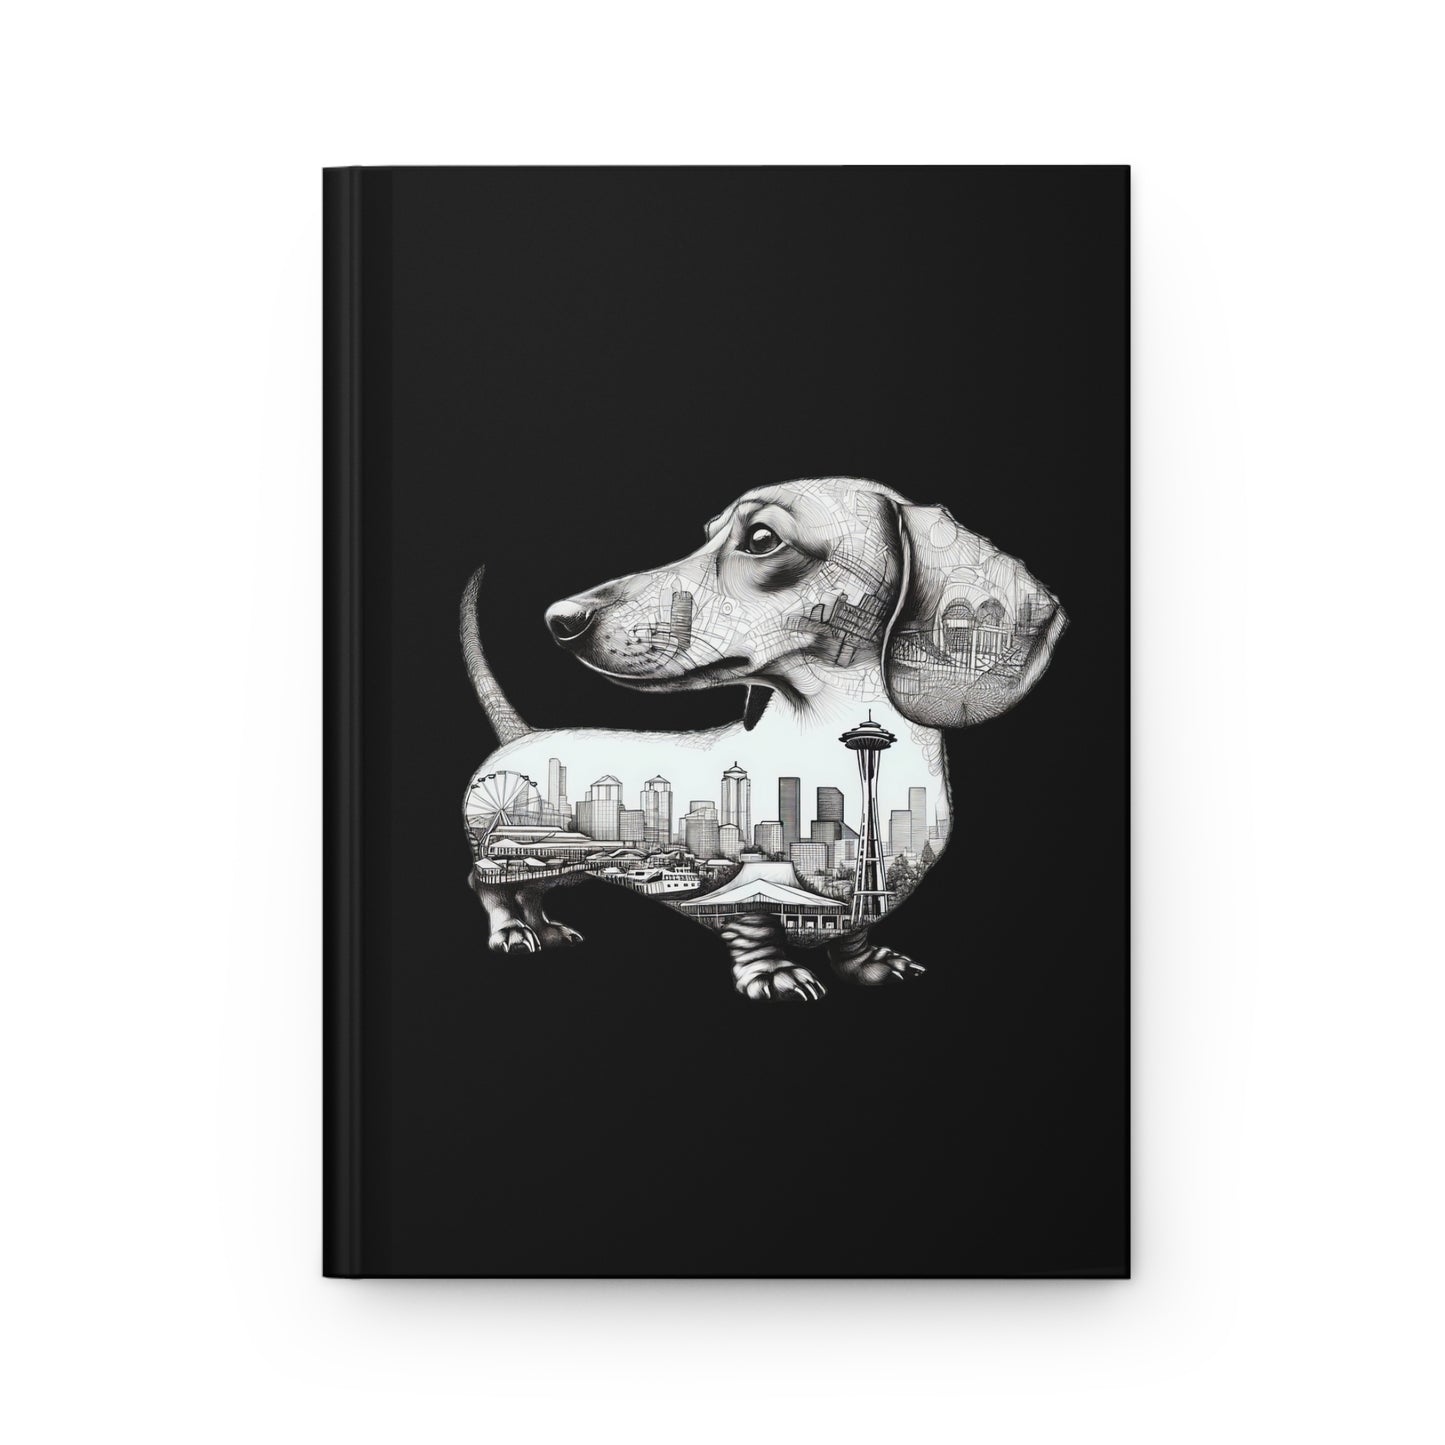 Seattle Skyline Dachshund Hardcover Journal - Urban Chic Notebook - Cityscape Dog Lover Diary - 150 Lined Pages